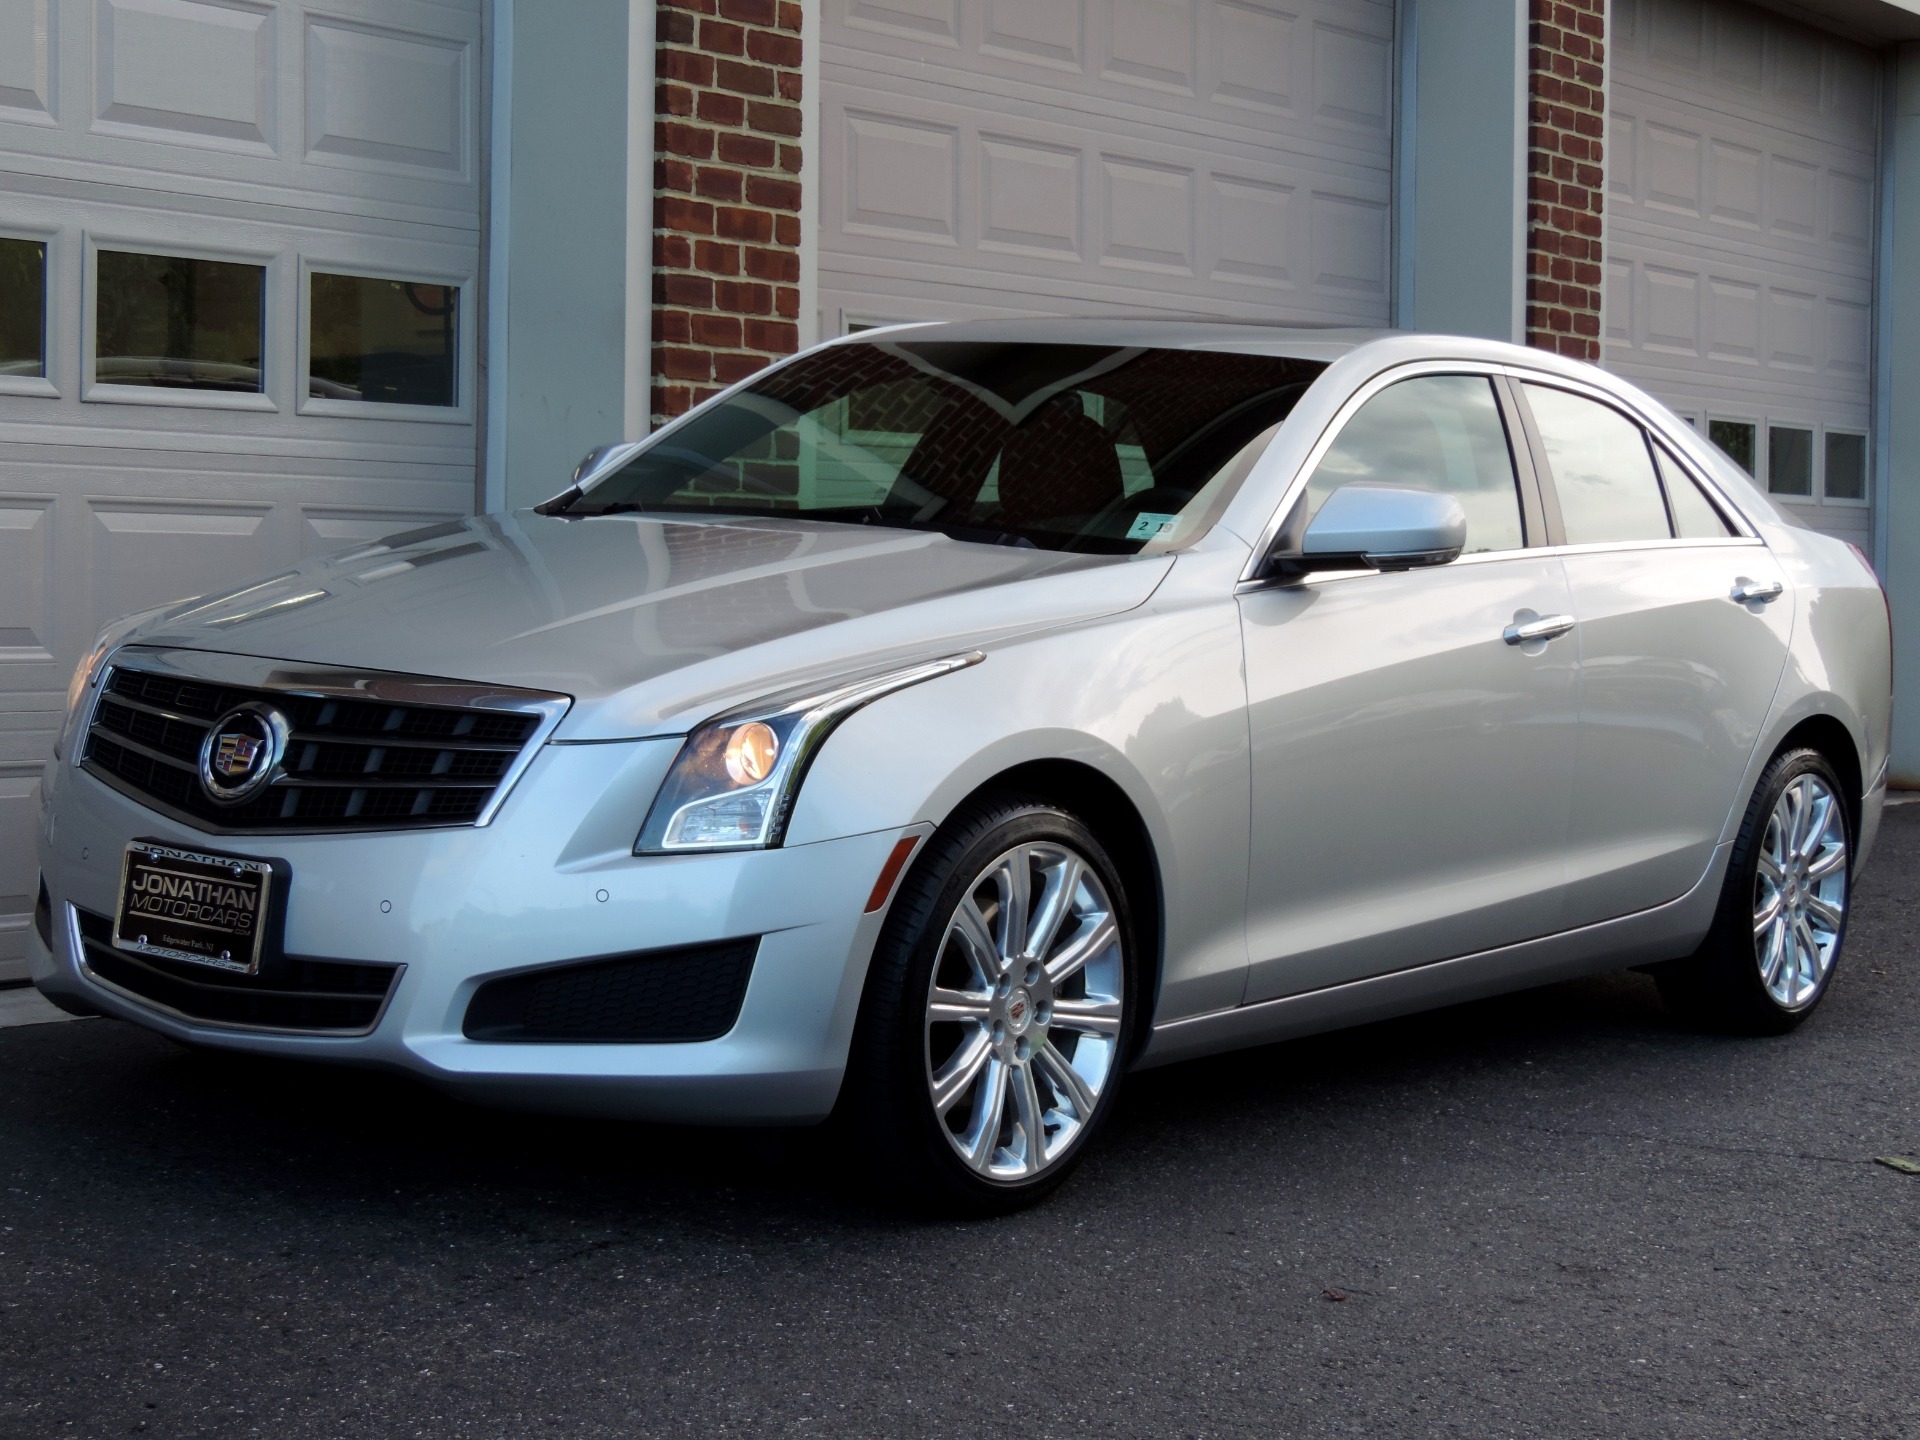 2014 Cadillac ATS 2 0T AWD Luxury Stock 168696 for sale near 